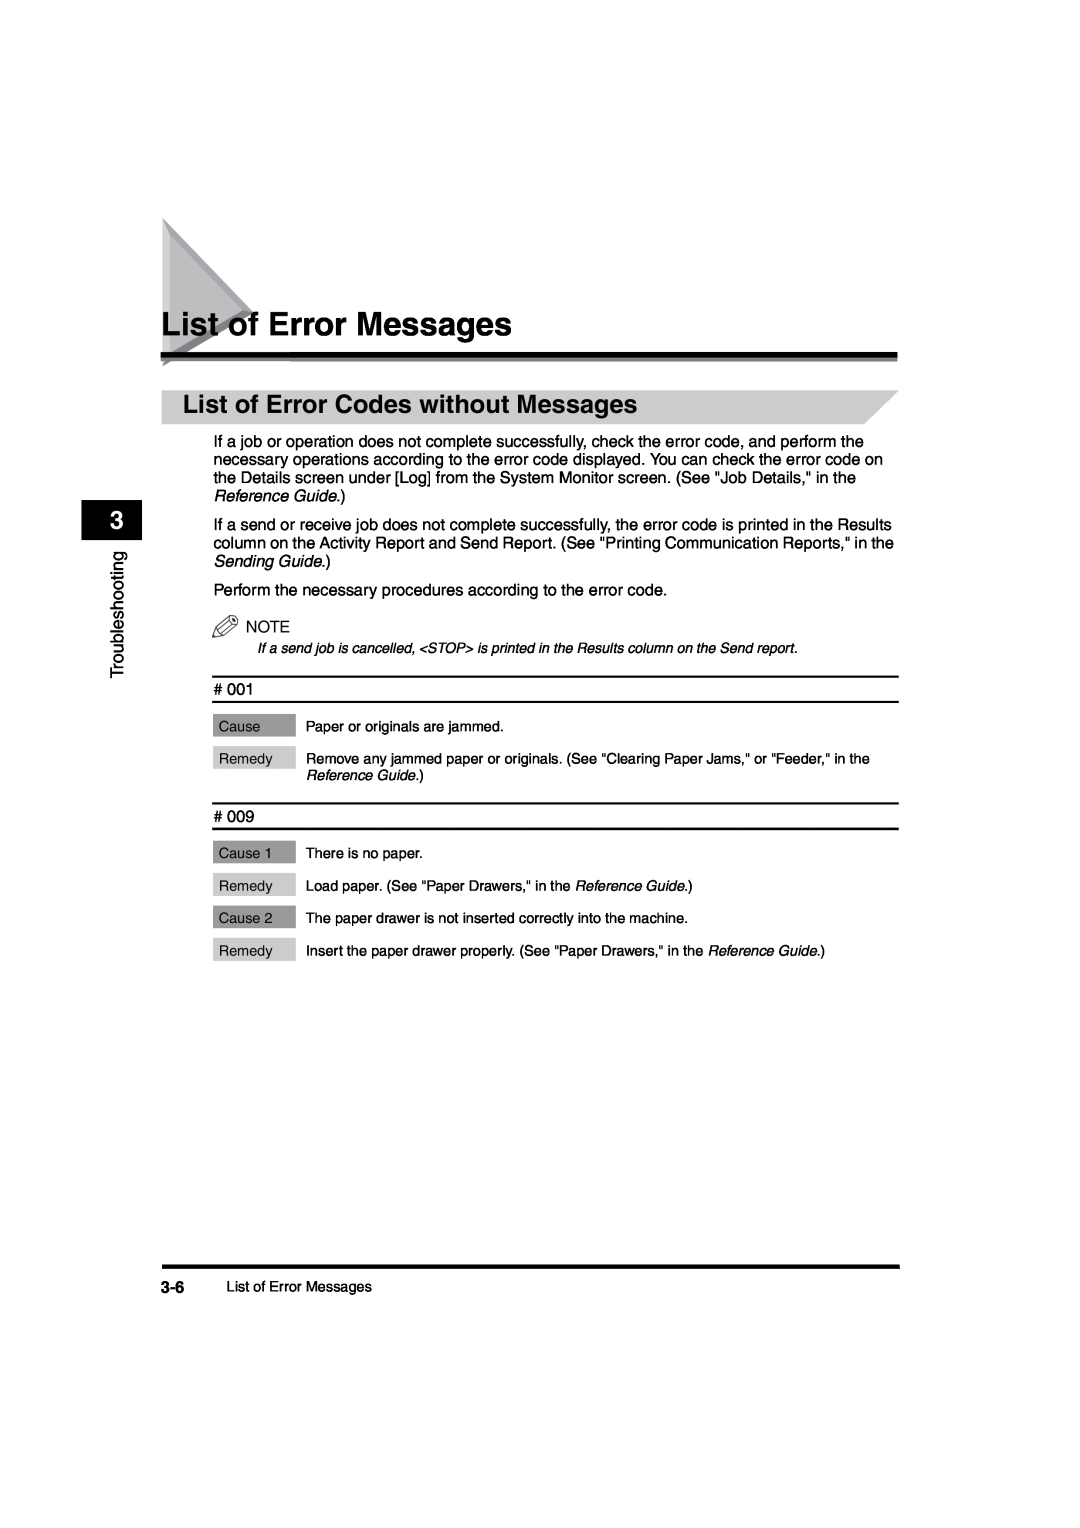 Canon iR6570 manual List of Error Messages, List of Error Codes without Messages 